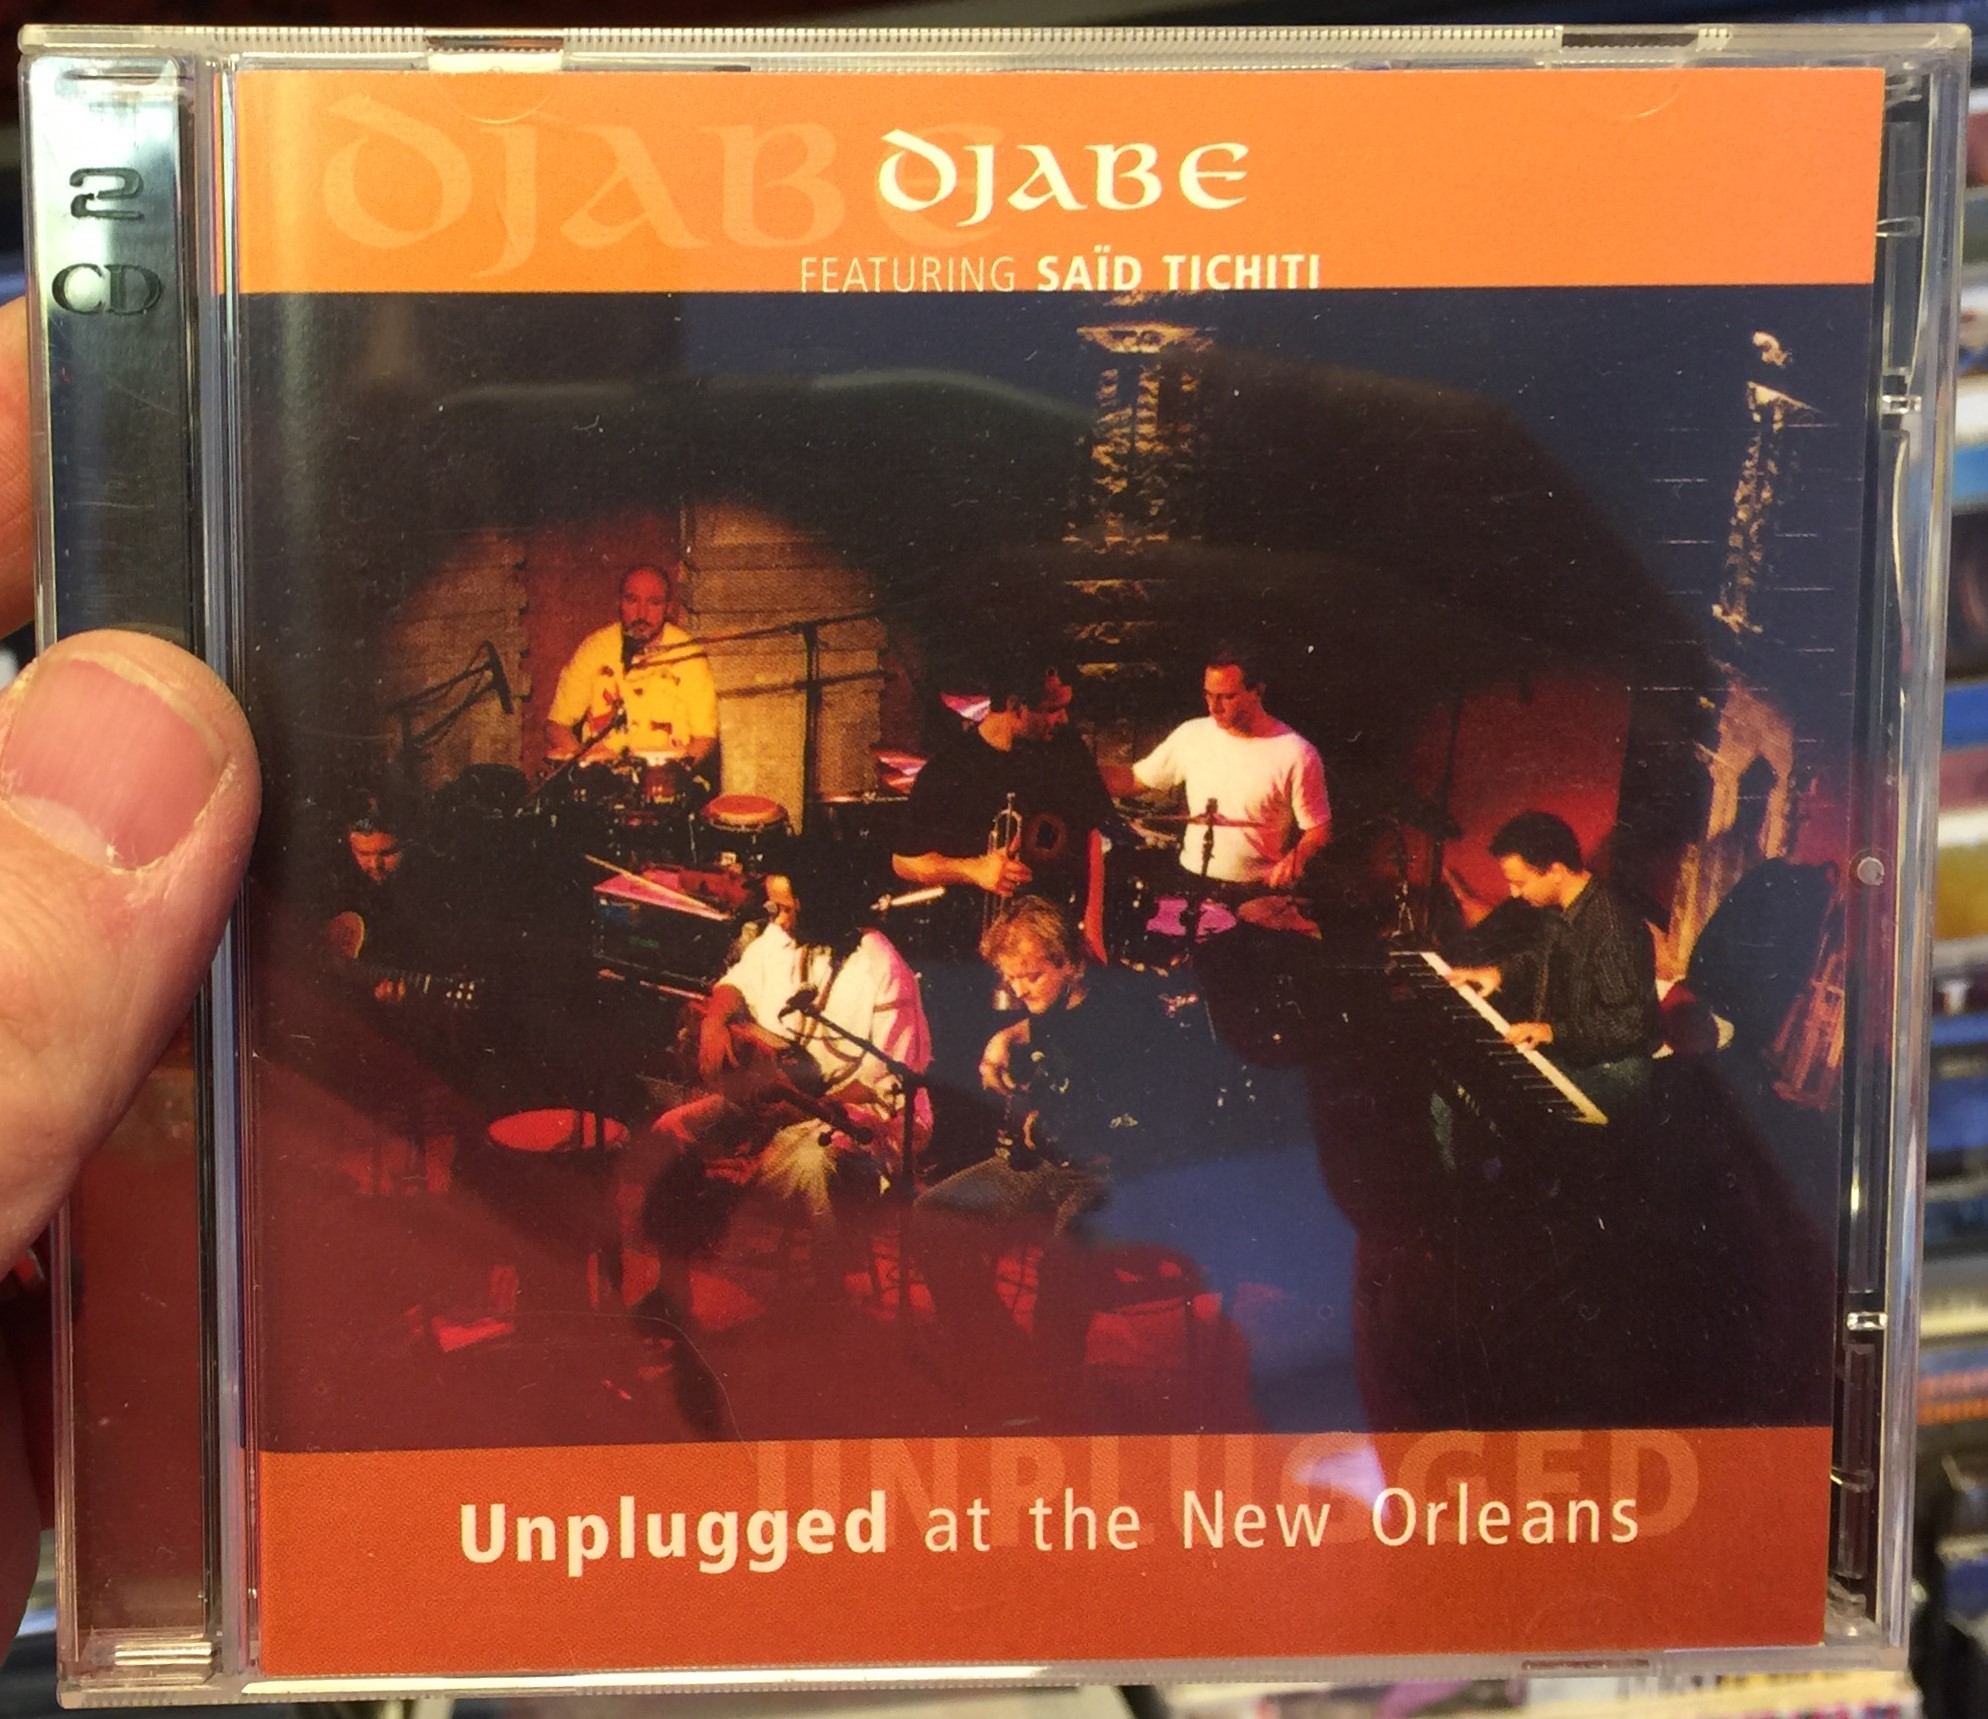 djabe-featuring-said-tichiti-unplugged-at-the-new-orleans-gramy-records-2x-audio-cd-2003-gr-047-1-.jpg